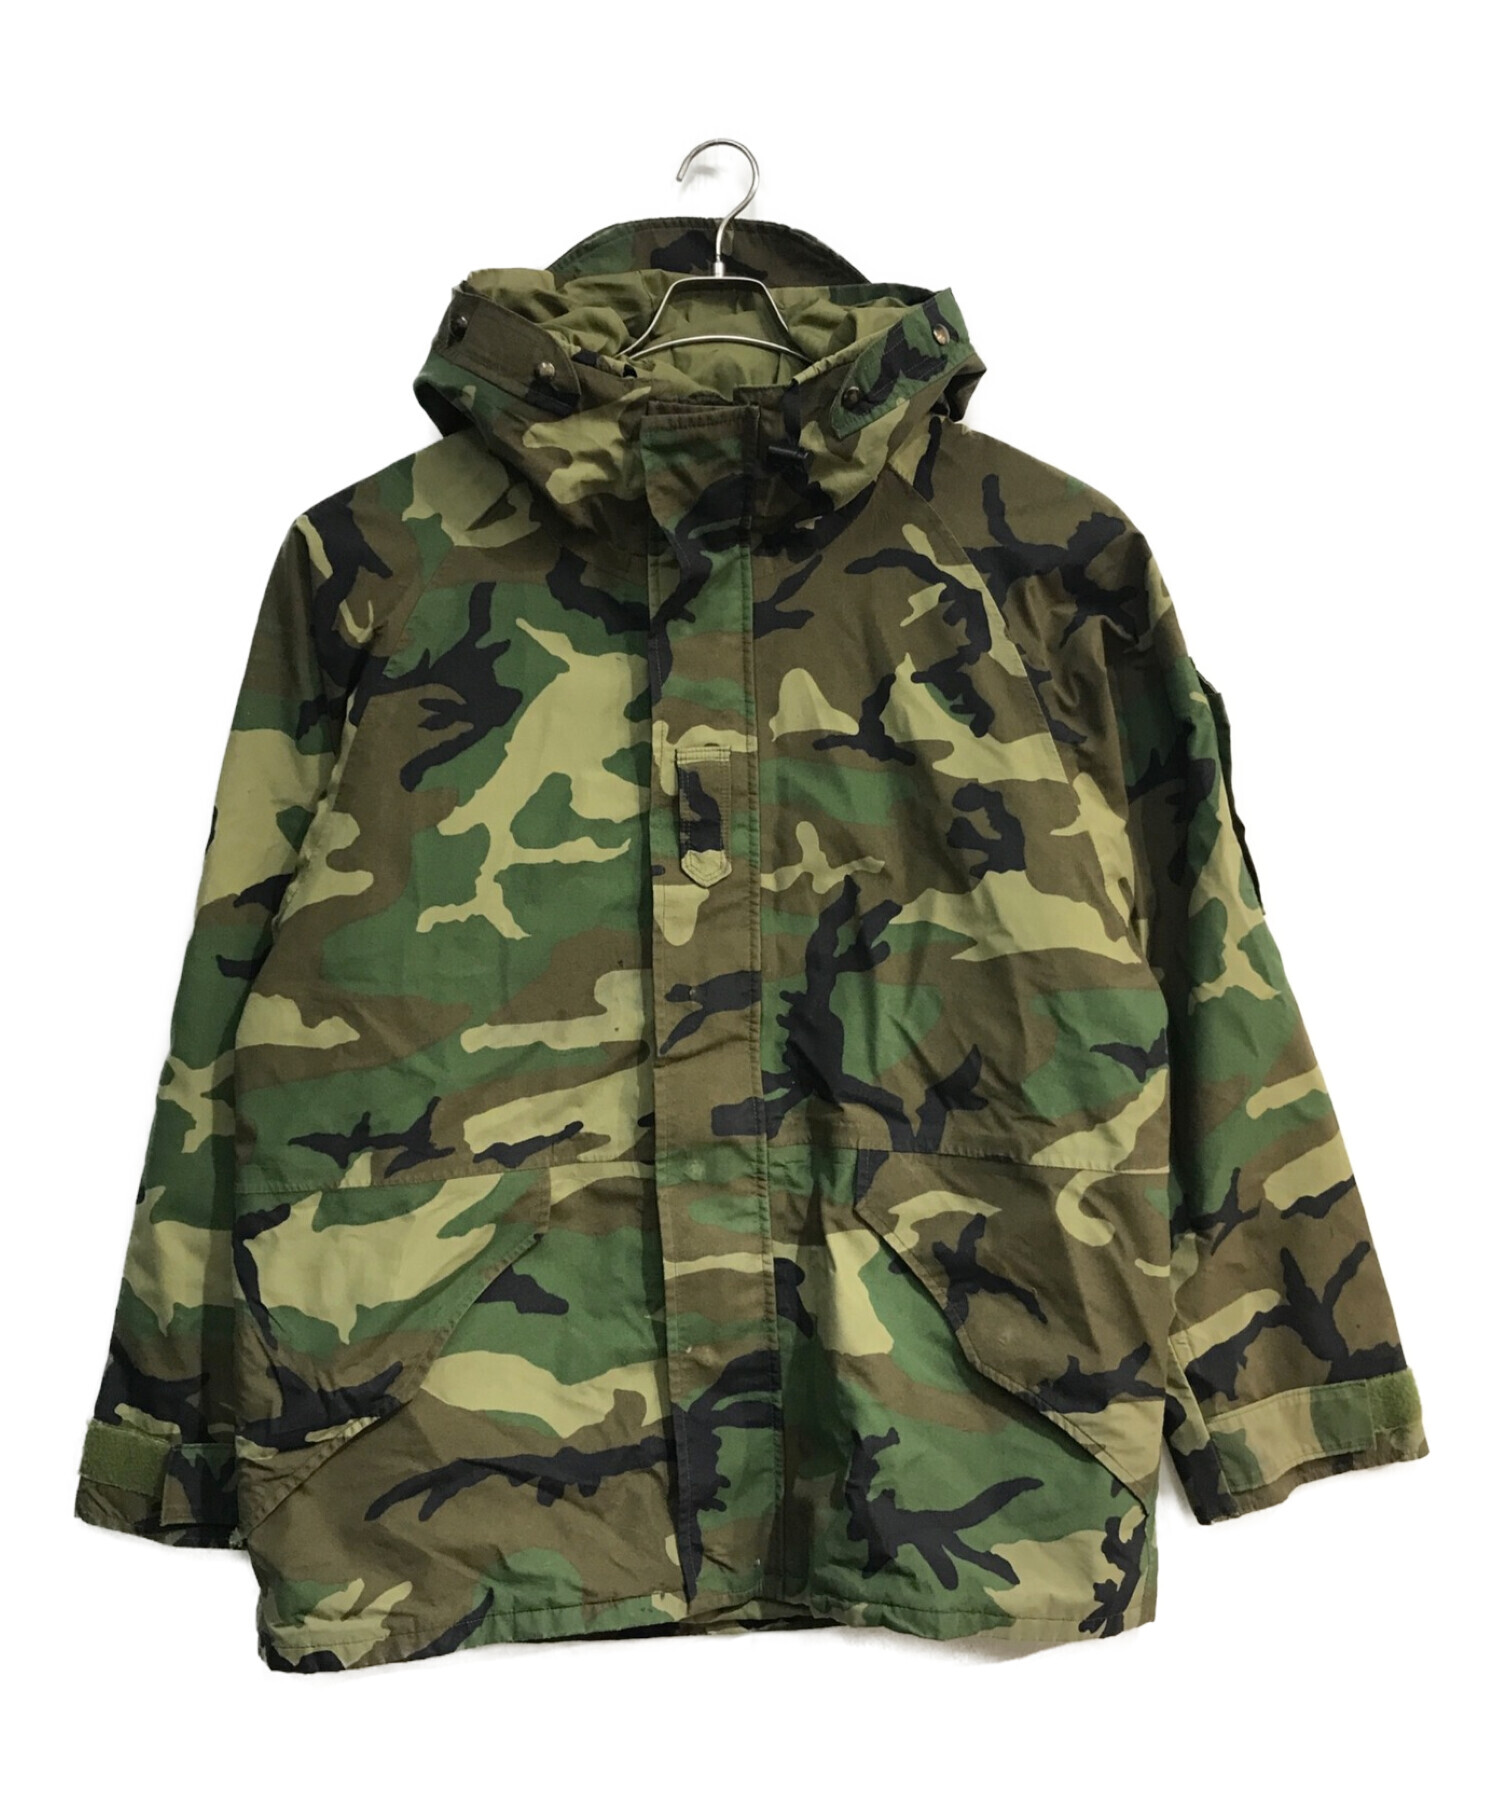 ECWCS GEN1 GORE-TEX CAMO PARKA　8415-01-228-13208415-01-228-1320　TENNESSEE  APPARL CORP製 PARKA, COLD WEATHER, CAMOUFLAGE